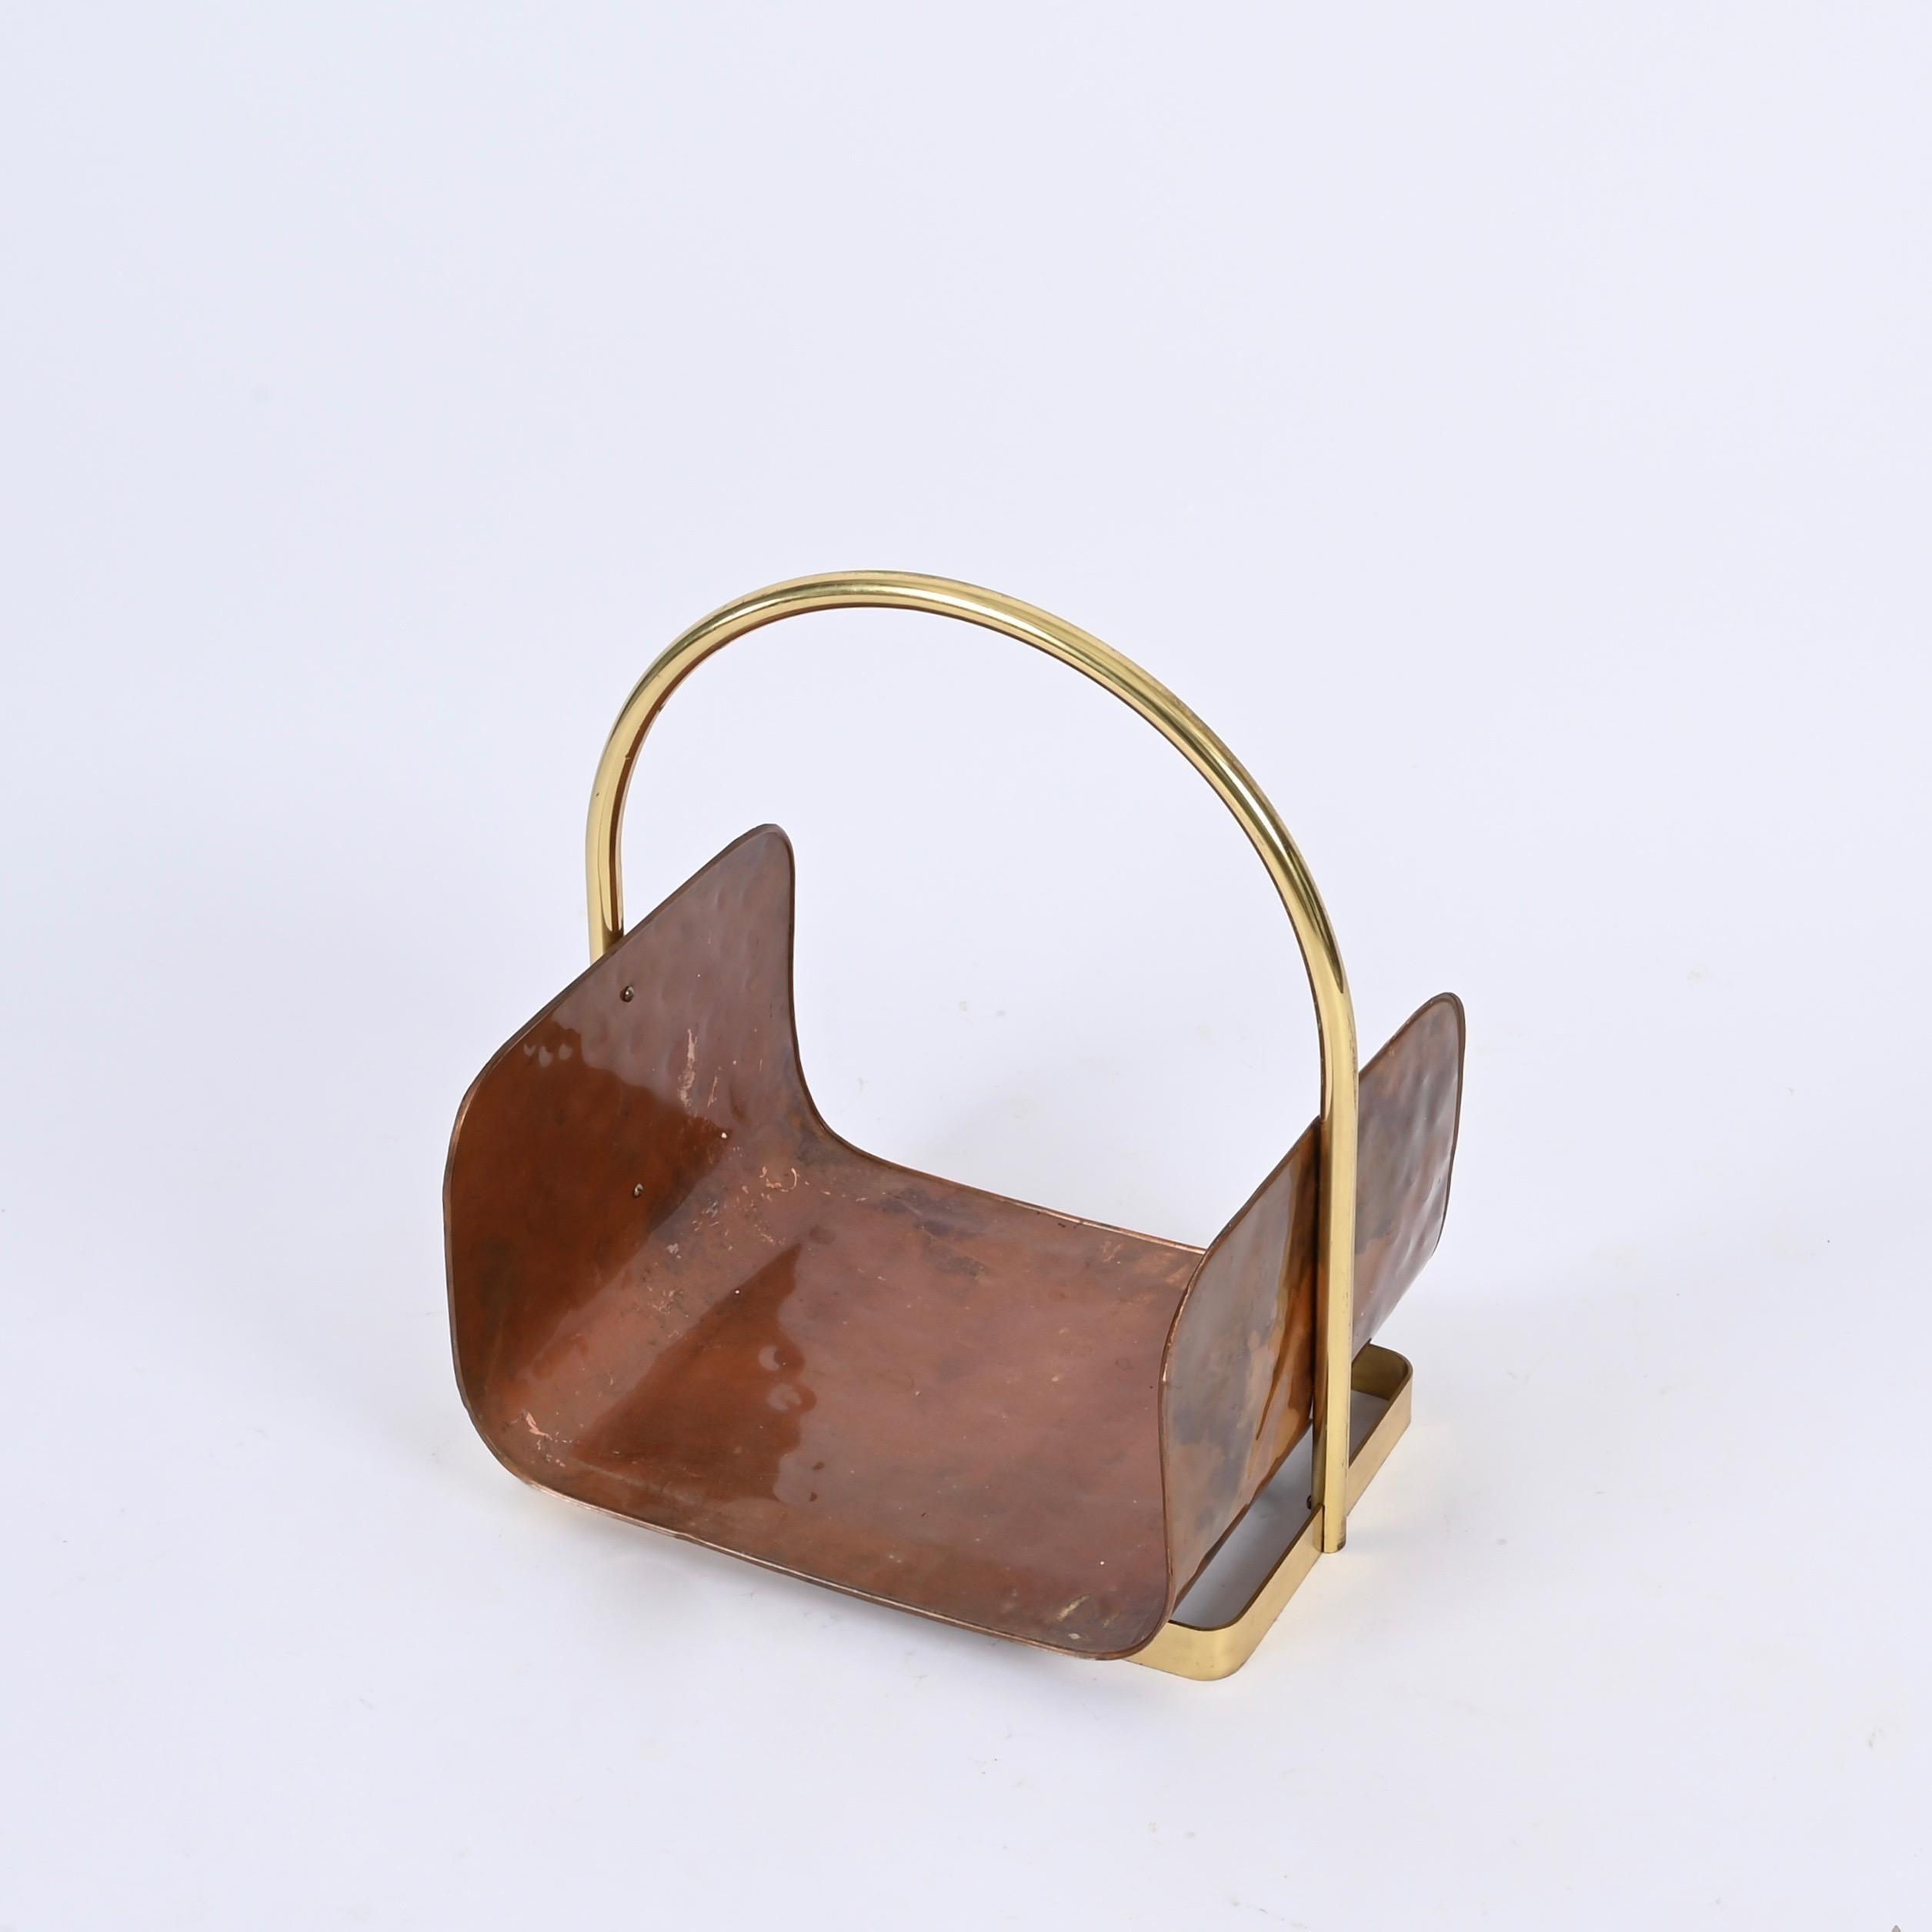 Midcentury Italian Magazine Rack in Hammered Copper and Brass, Italy 1970s For Sale 5